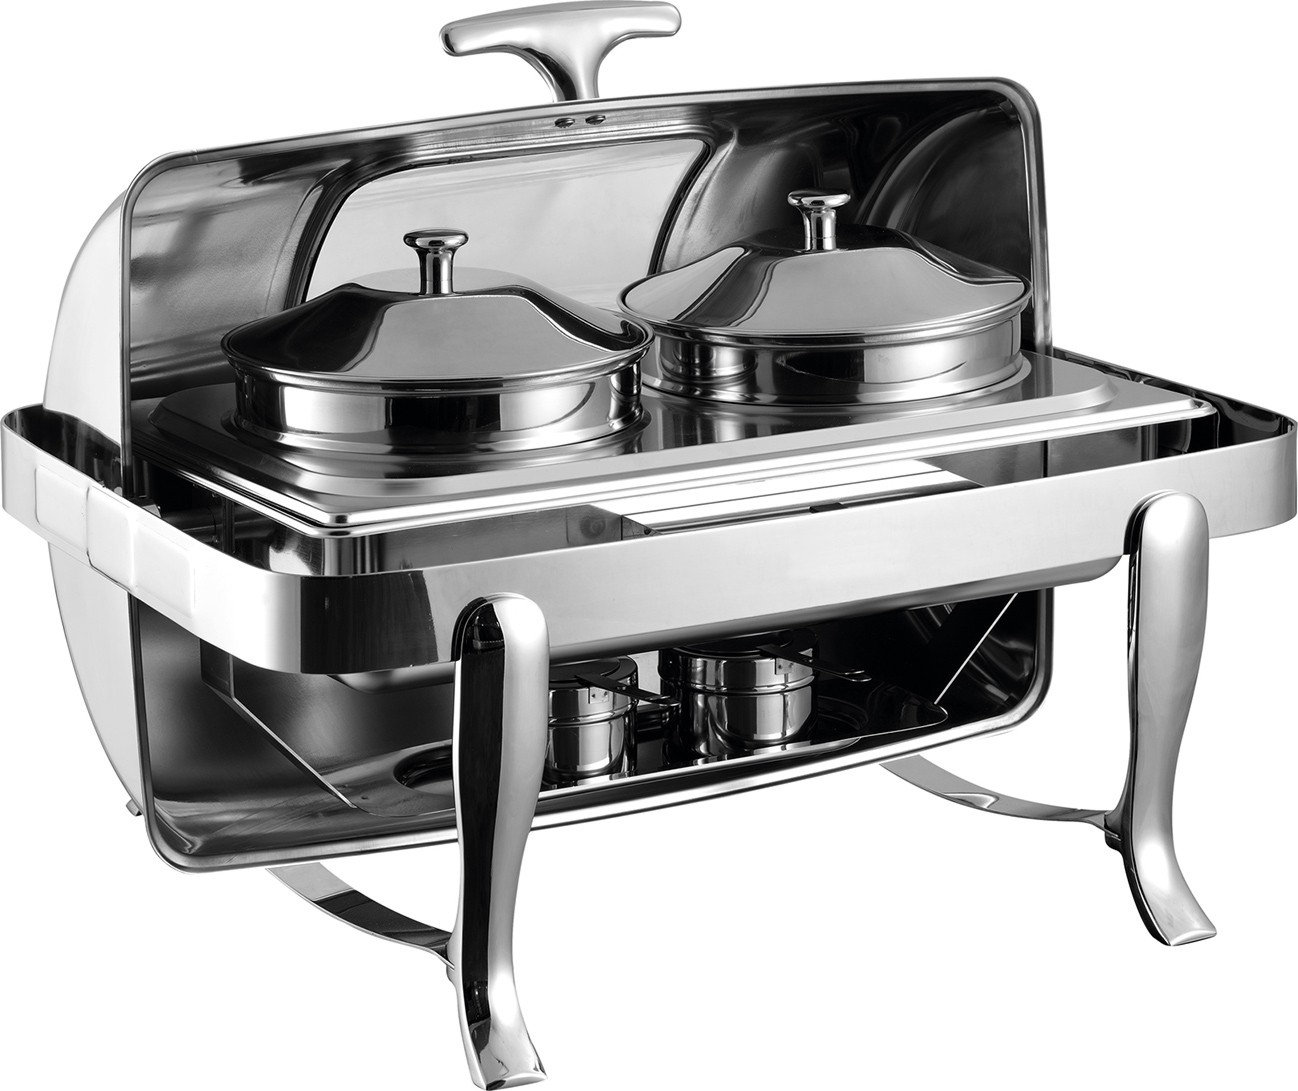 GRT-6808KS Stainless Steel Visible Window Round Chafing Dish 9L for Soup